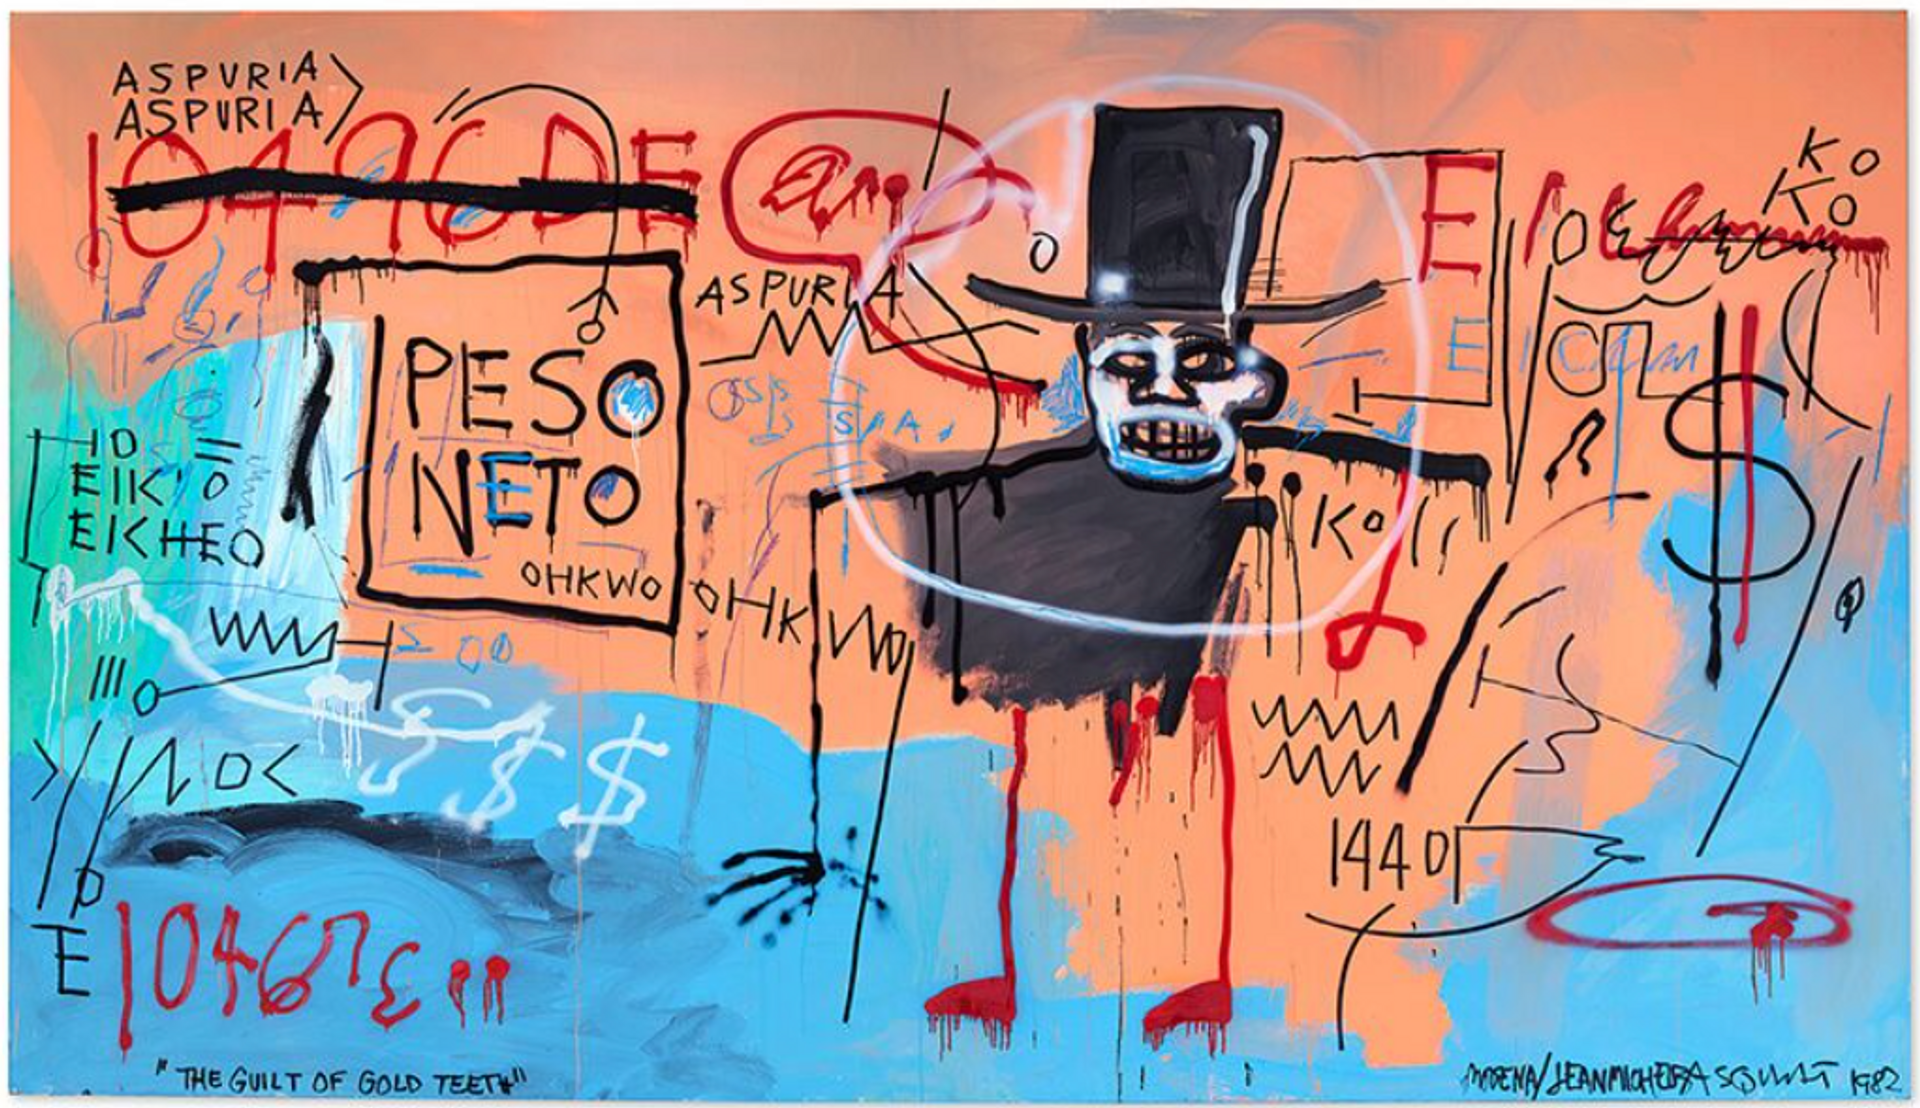 A vibrant painting by Jean-Michel Basquiat featuring a peach and blue background. The canvas is adorned with black and red scribbles, including various writings, symbols, and numbers. On the left side, there is a box with the word "PESO" above "NETO". In the center, a cartoon-like figure with stick legs, a ghostly face, yellow eyes, a wide grin, and a tall top hat can be seen. To the right of the painting, there is a United States dollar sign.